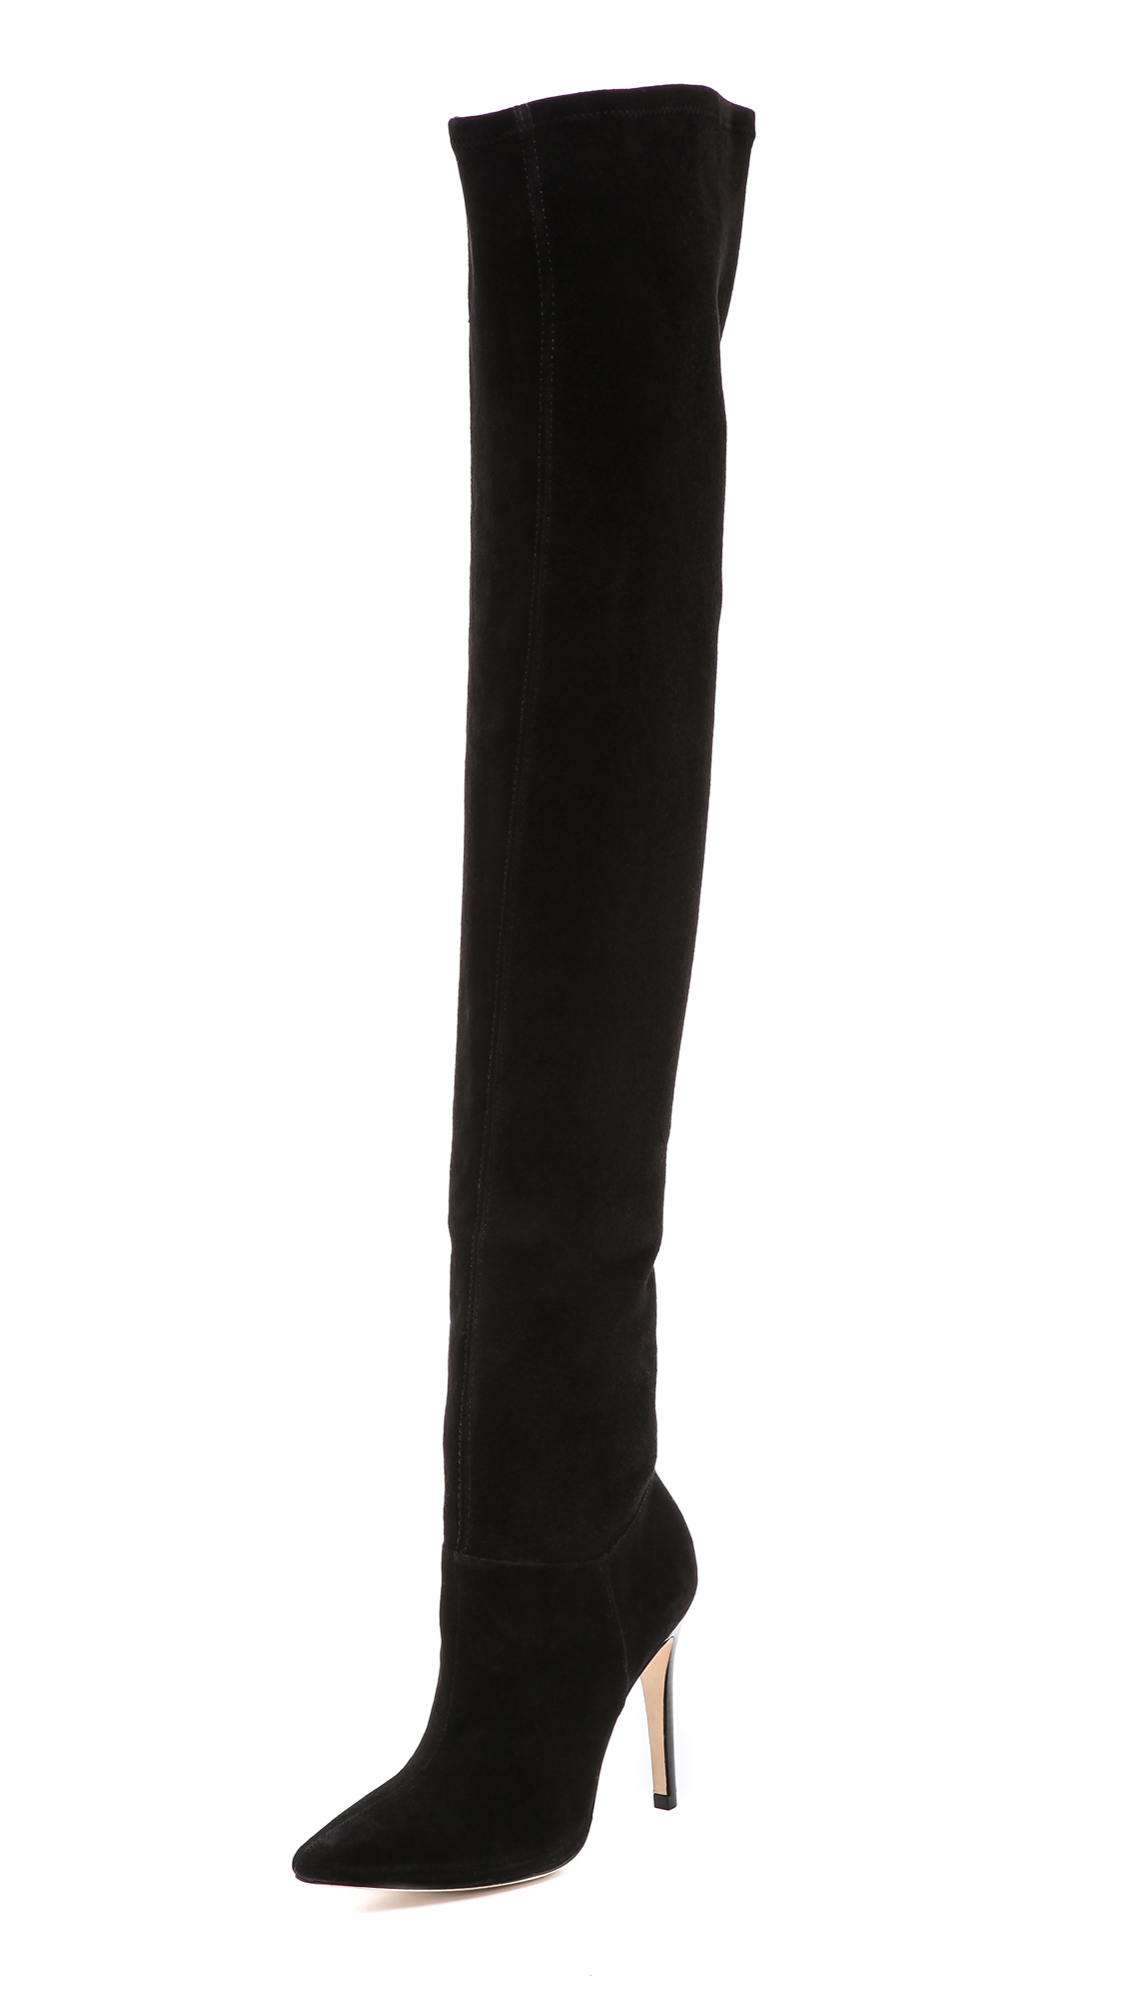 Lyst - Alice + Olivia Alice Olivia Dae Stretch Over The Knee Boots in Black